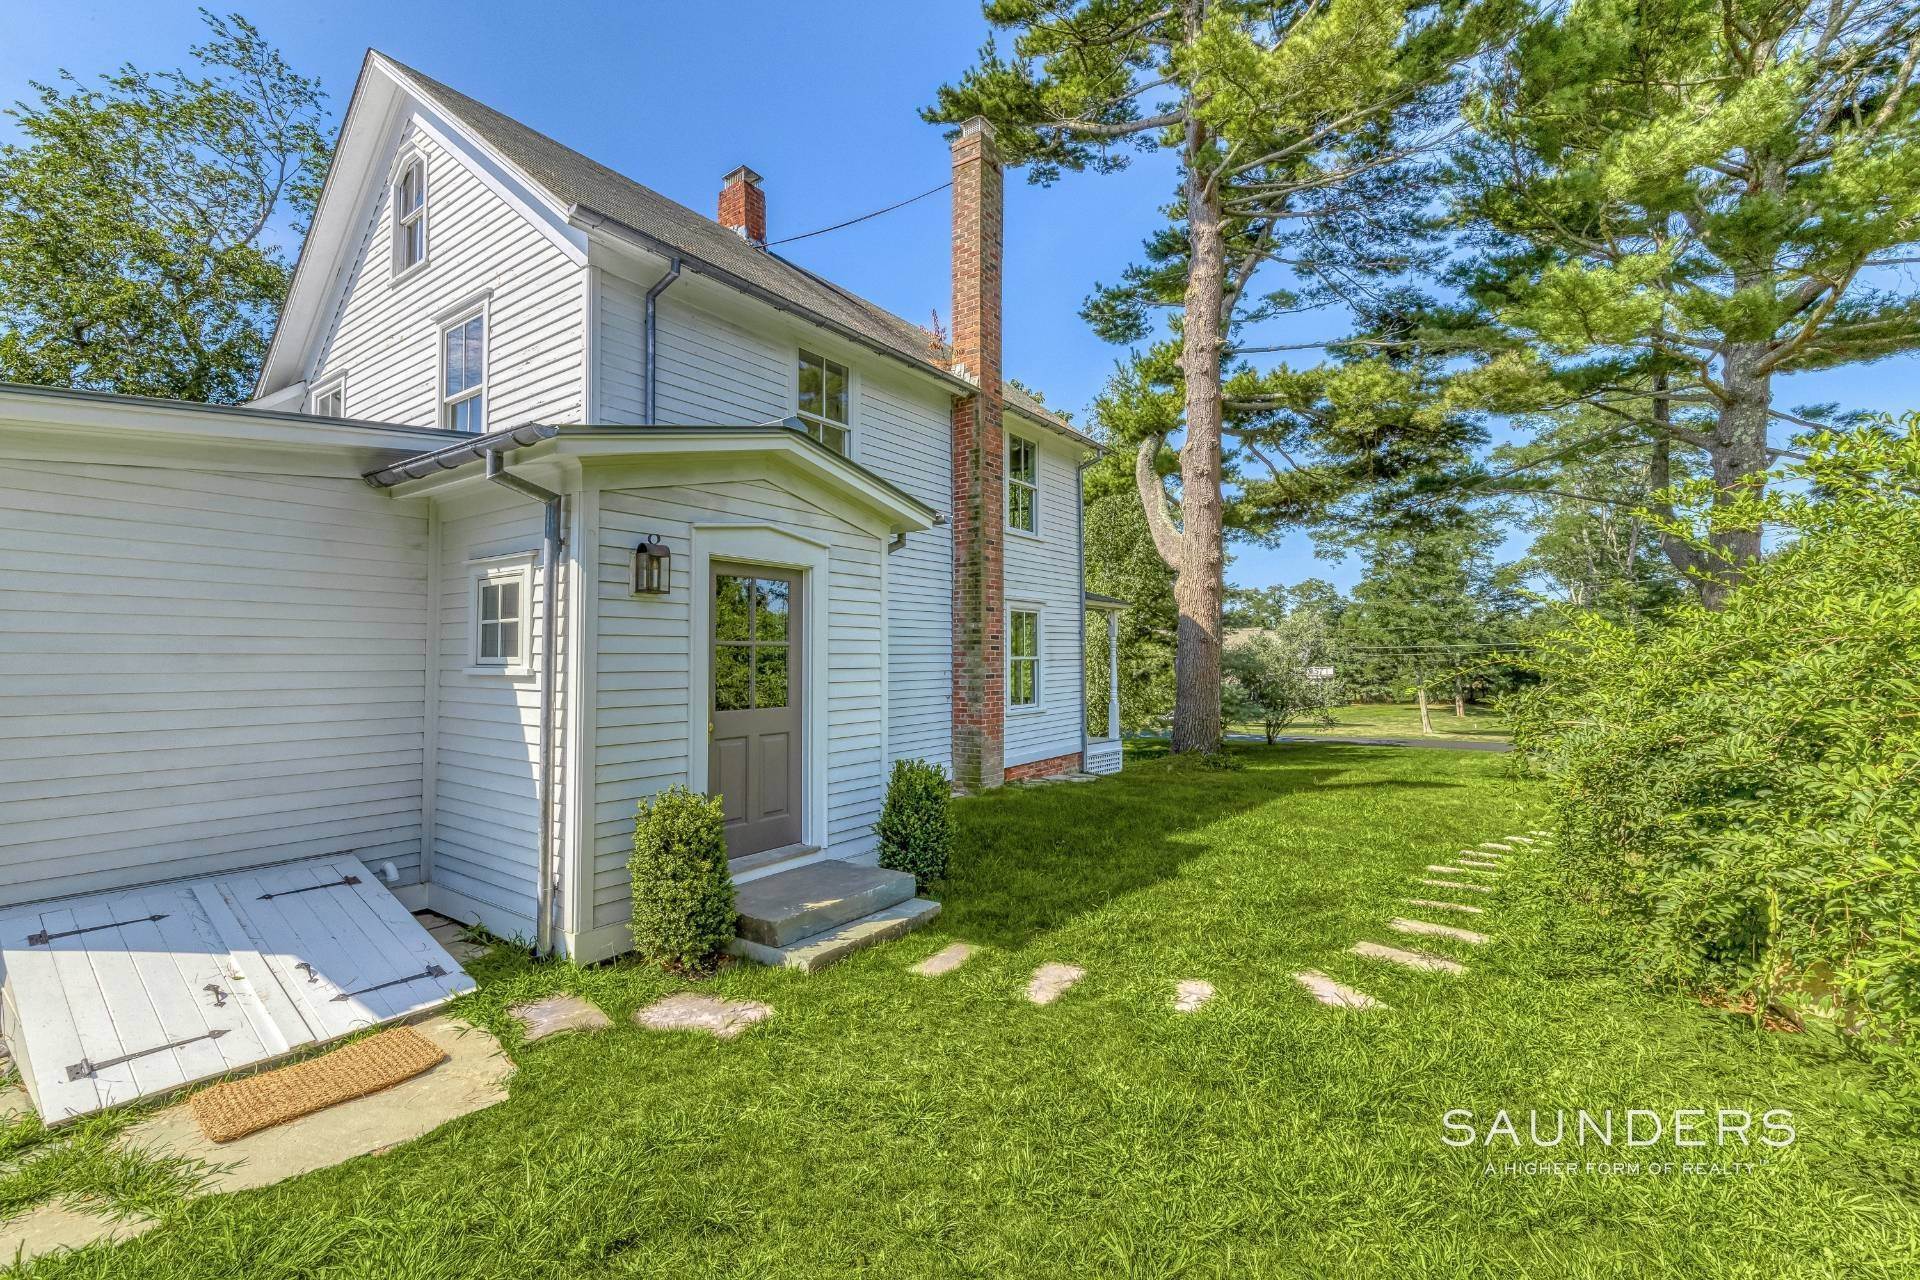 43. Single Family Homes for Sale at Shelter Island Restored 1900 Farmhouse With Barn 9 Sunshine Road, Shelter Island, NY 11964